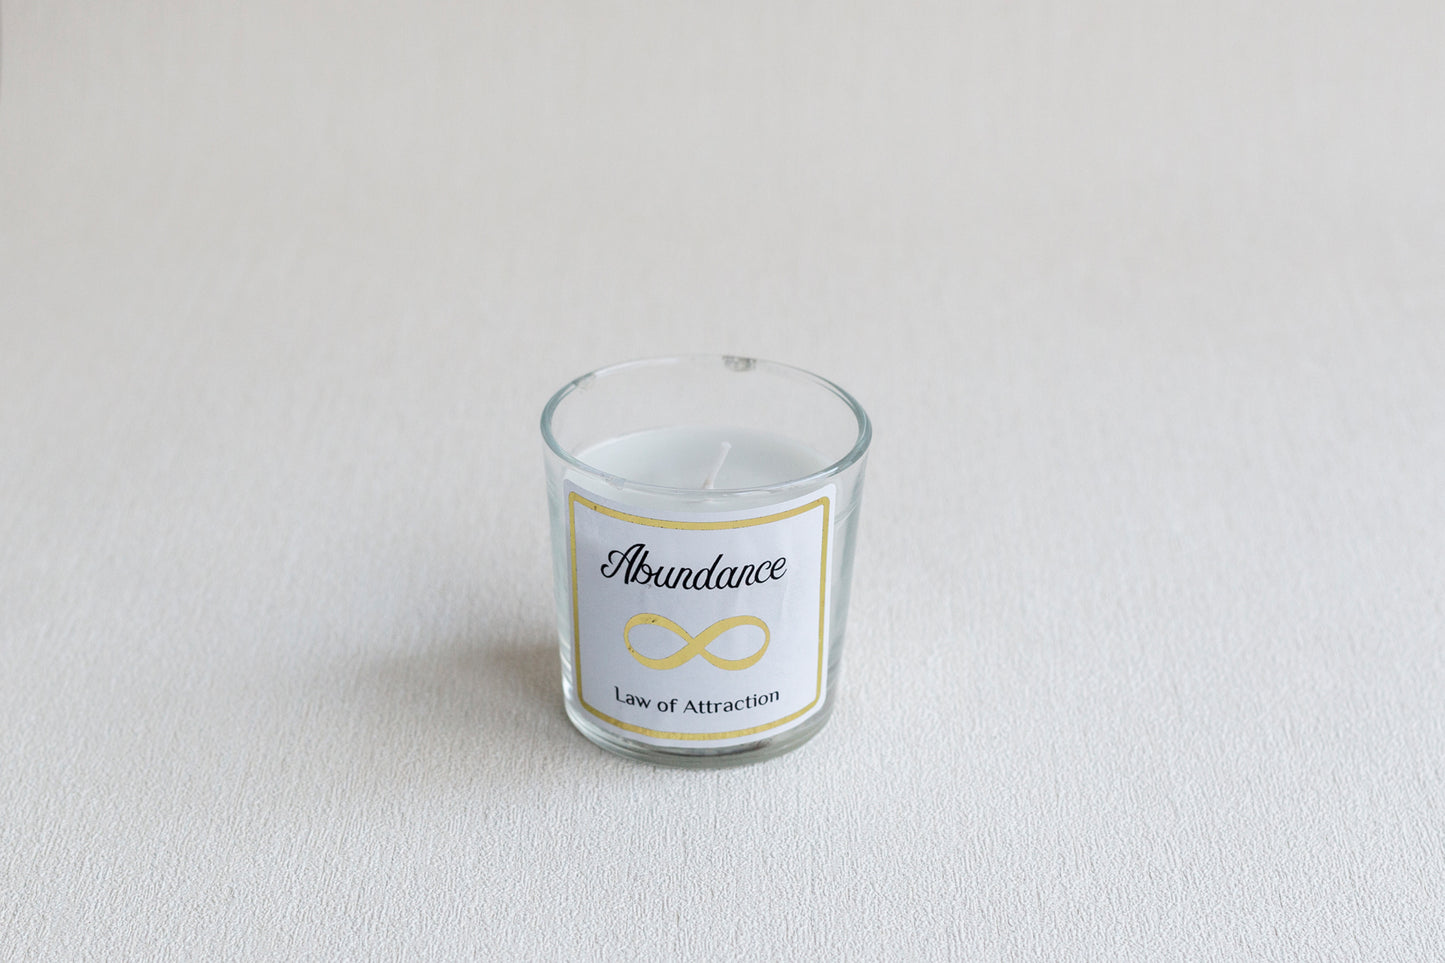 Law of Attraction Abundance Candle